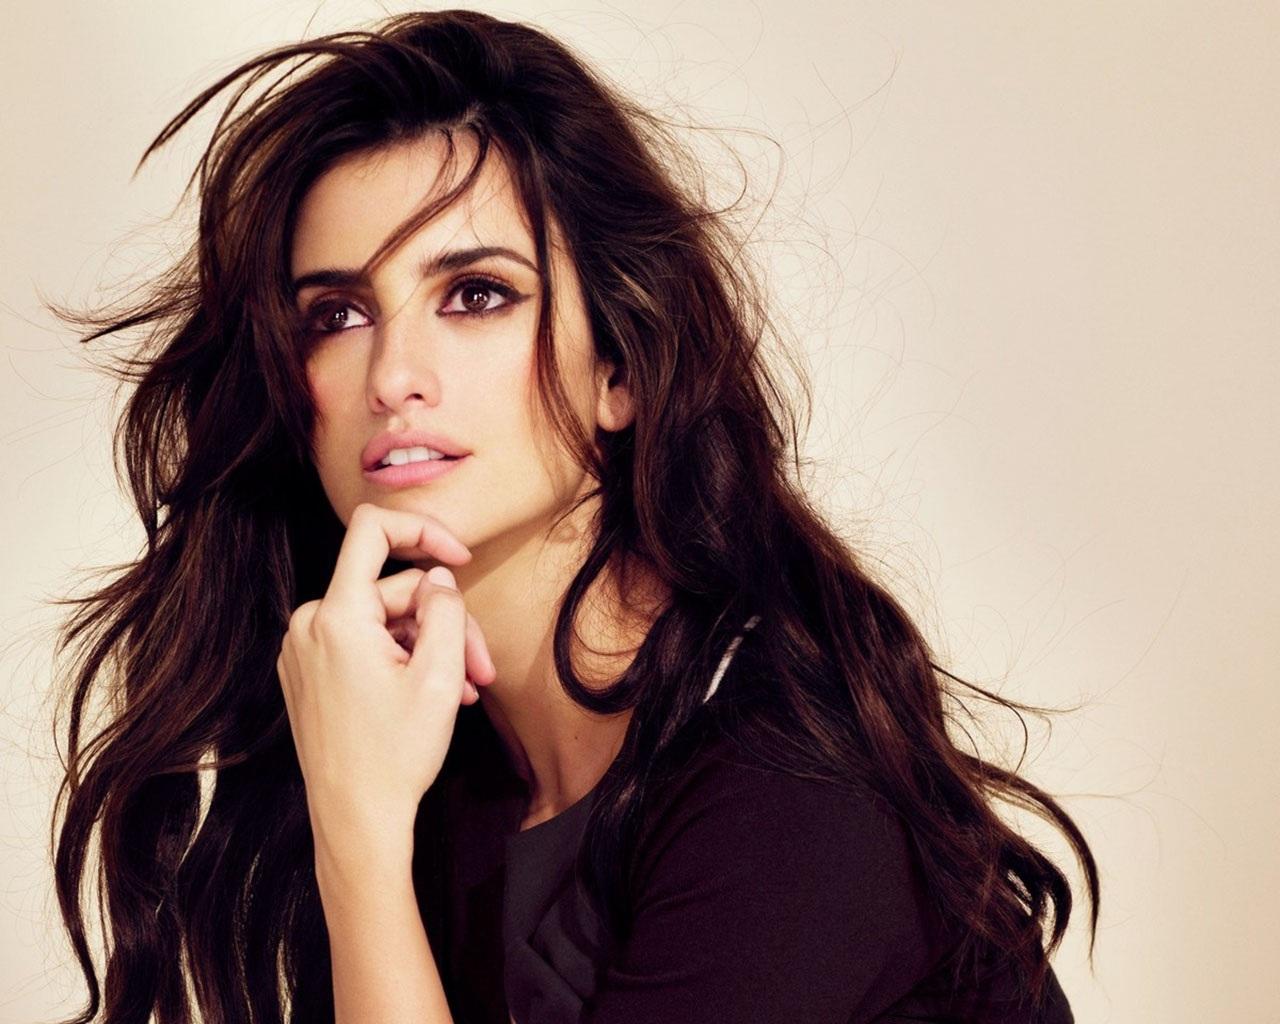 Penelope Cruz Wallpapers Celebrity Hq Penelope Cruz Pictures 4k Wallpapers 2019 Why do they always have to have these people with 'the fly'? penelope cruz wallpapers celebrity hq